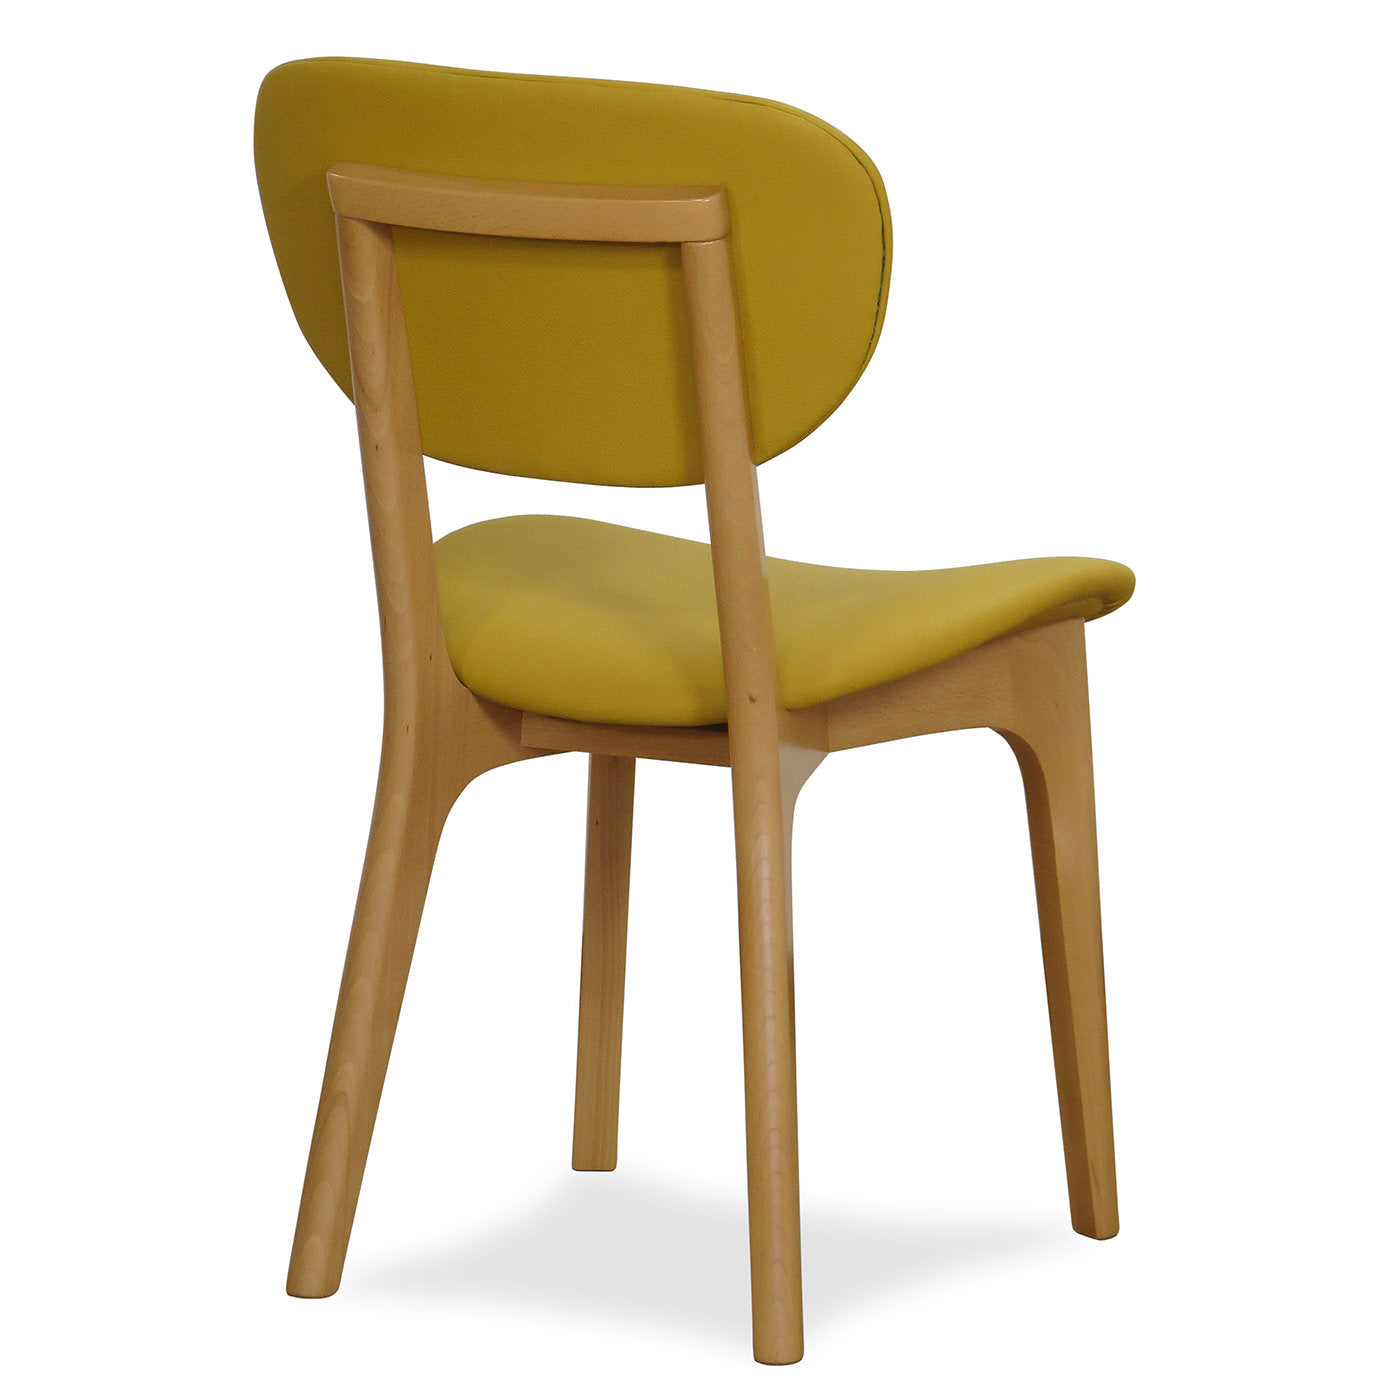 Cozy Set of 2 Mustard Chairs by Giacomo Cattani - Alternative view 2